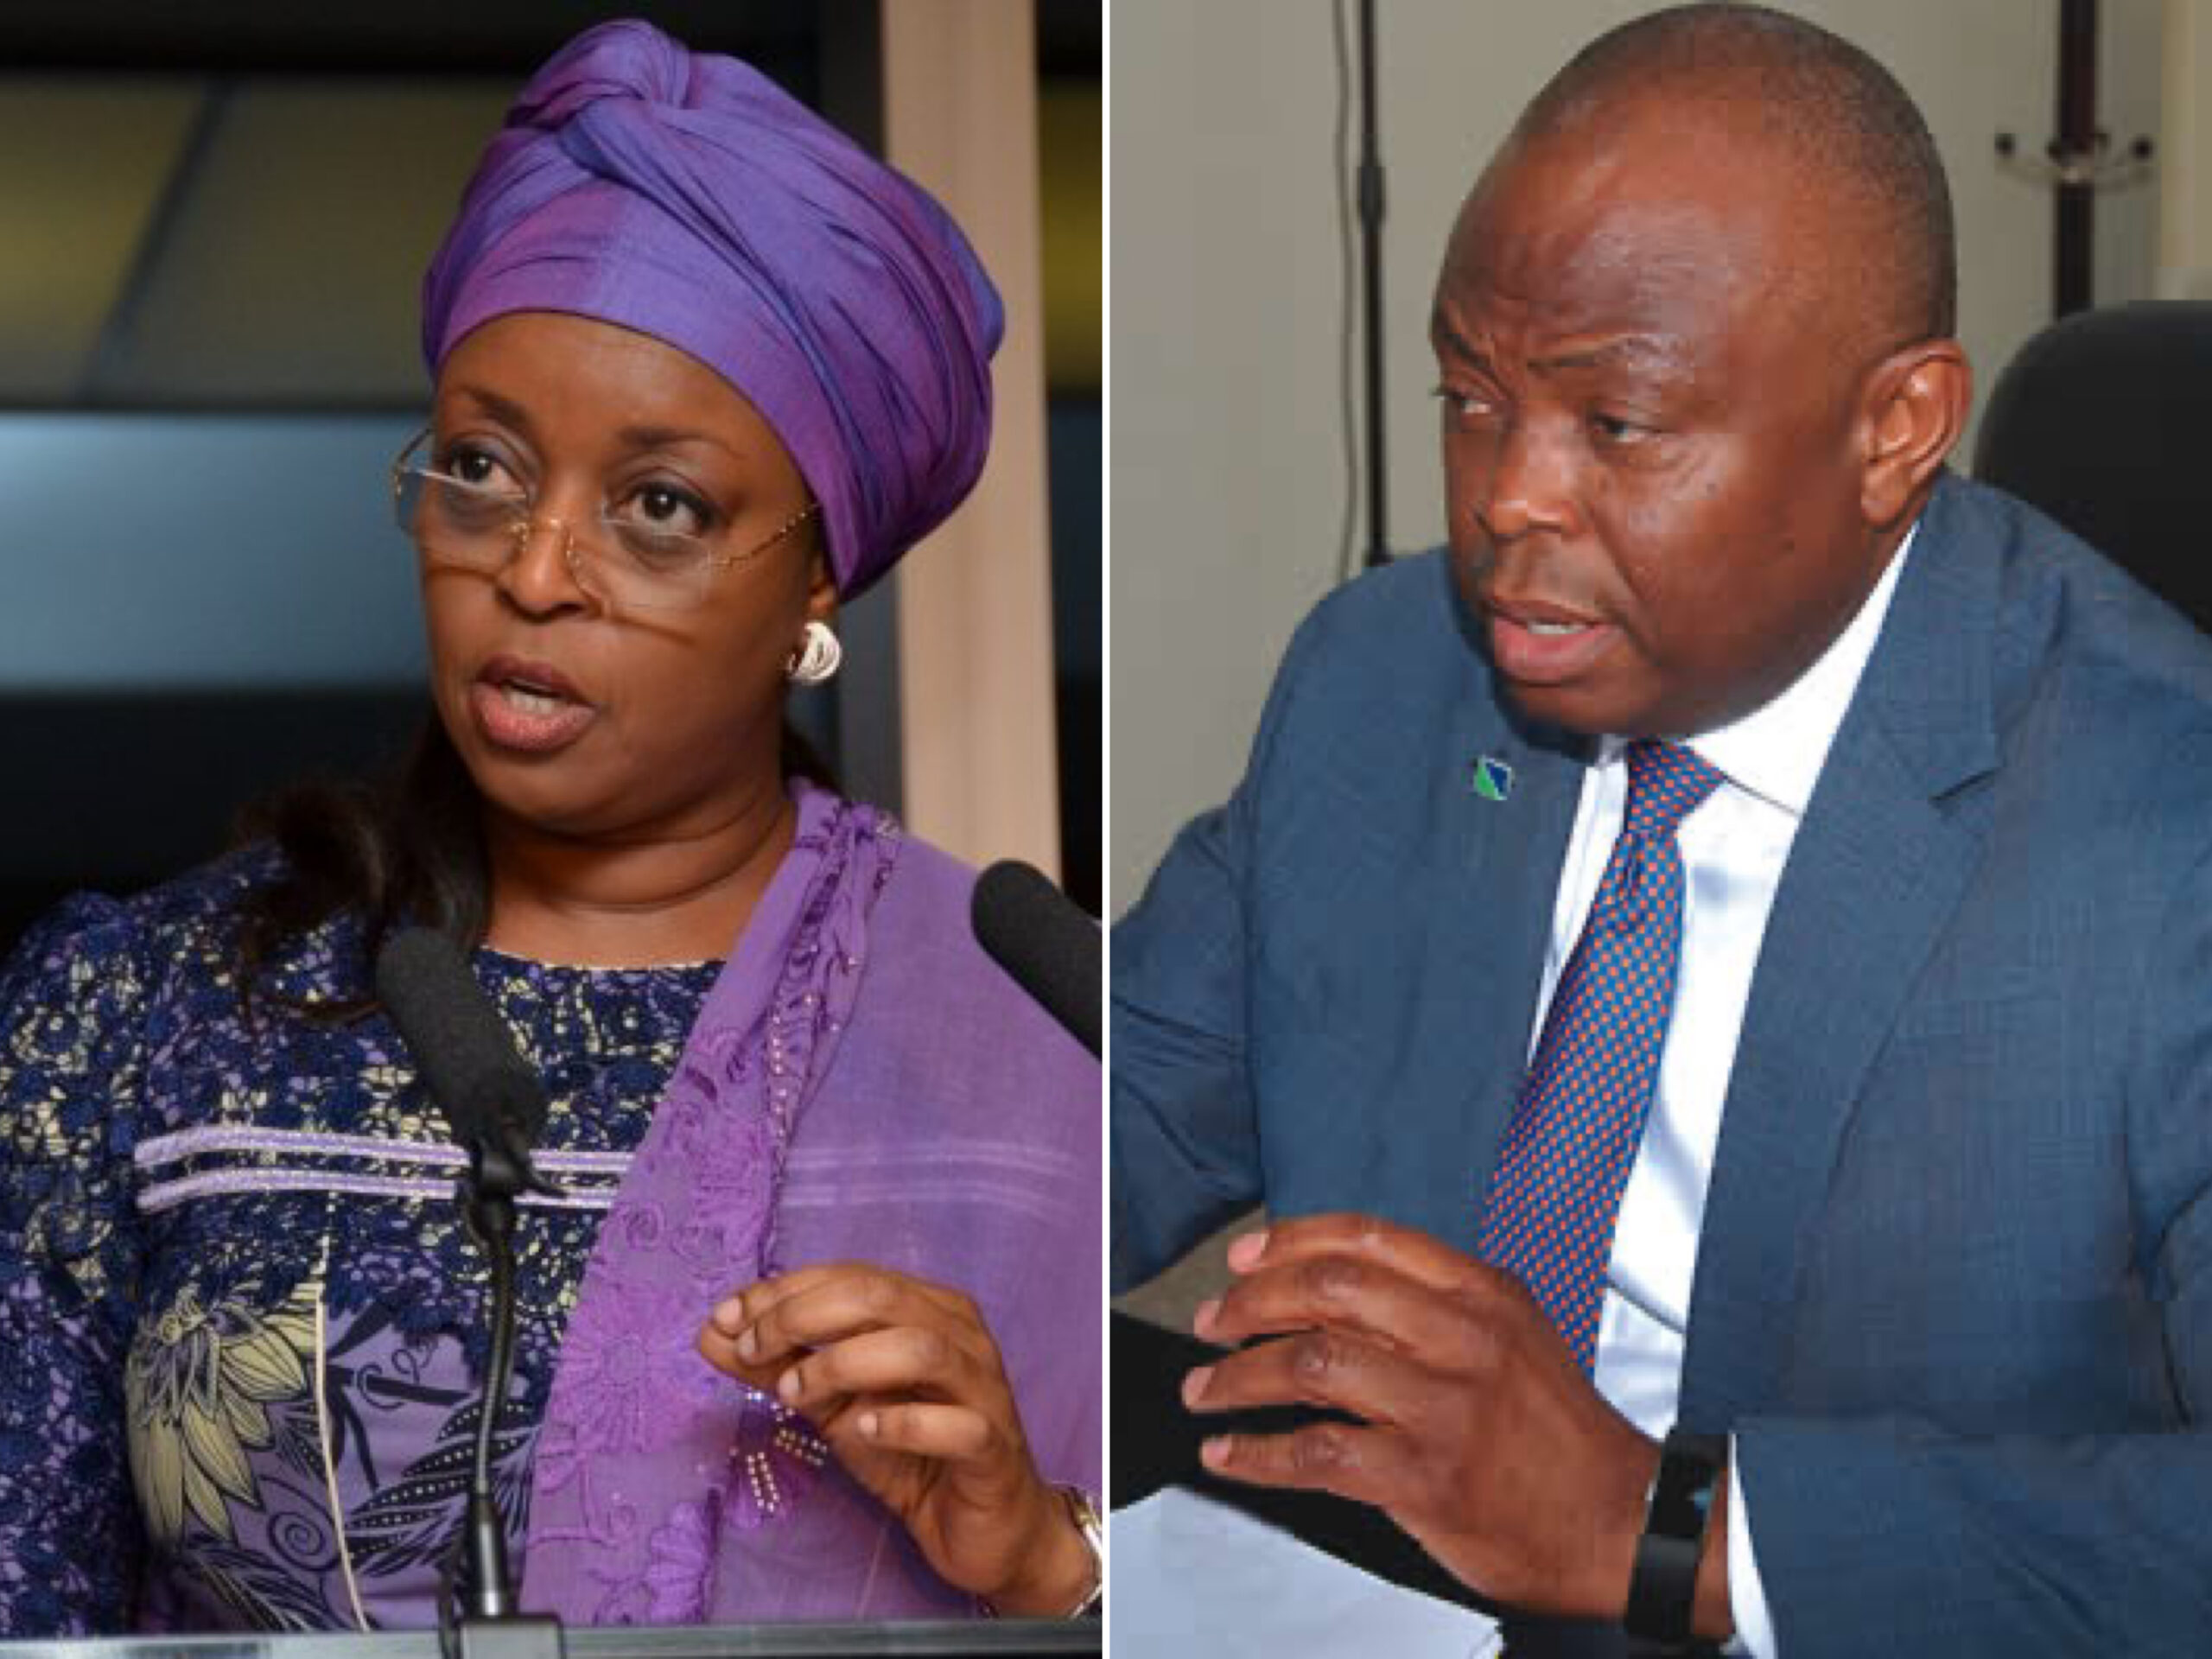 EFCC Uncovers Additional $72.8m Linked To Diezani, Arrests Ex-Fidelity Bank MD